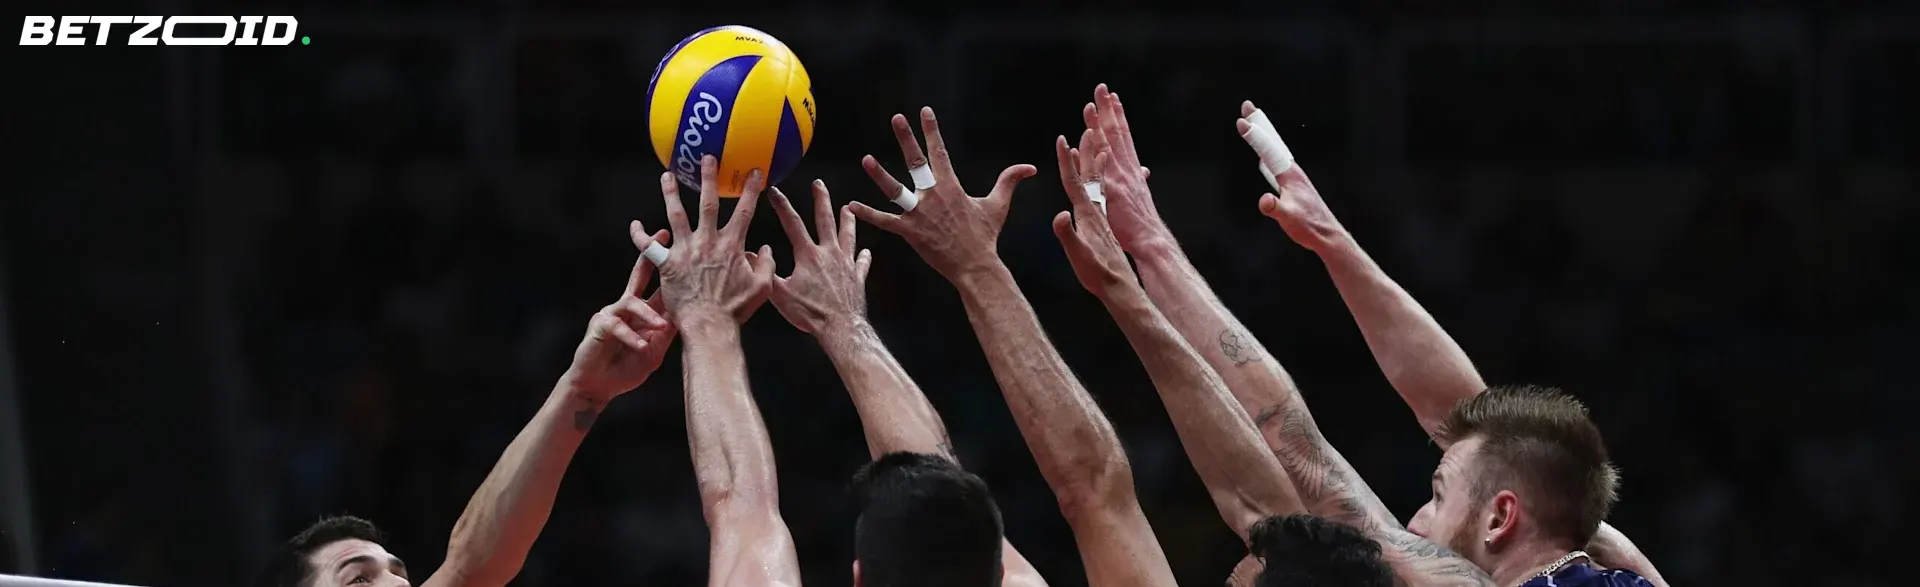 Volleyball players reaching for the ball during a match, symbolizing the diverse sports events available on Alberta sports betting sites.